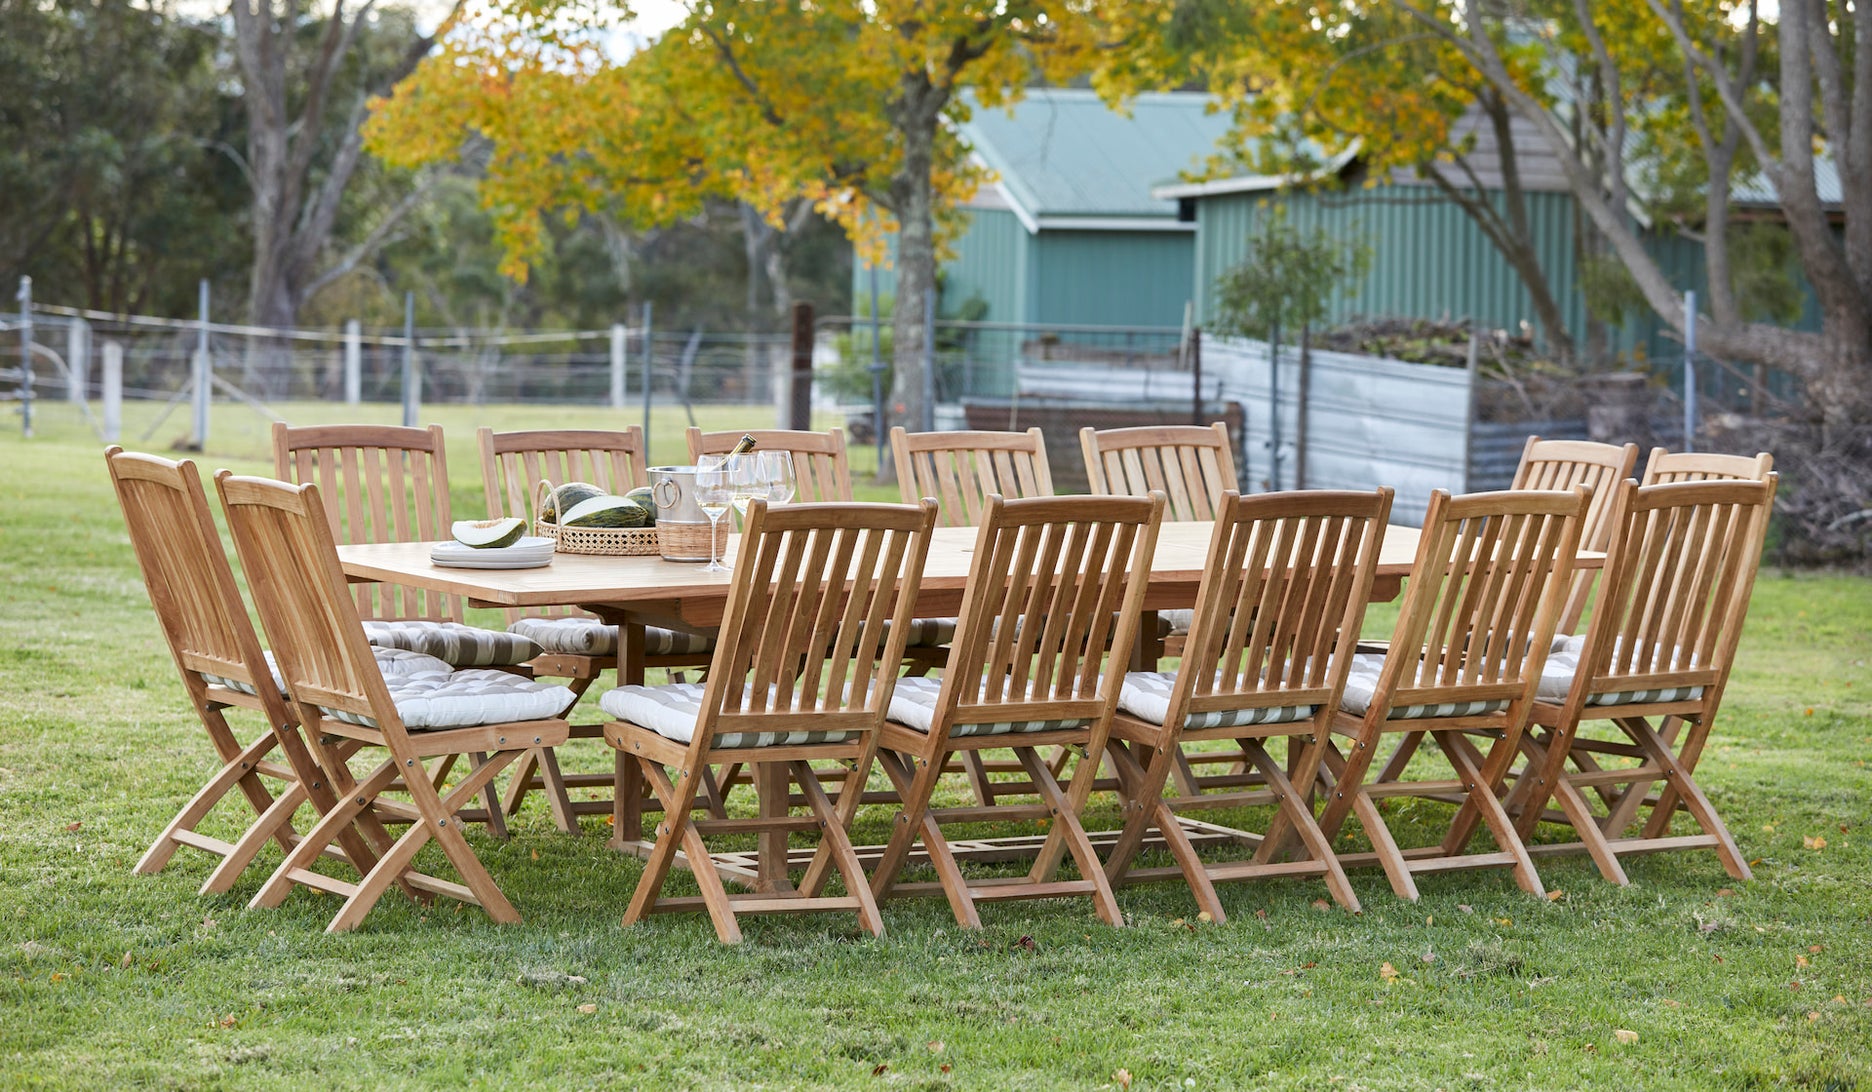 A handy guide to cleaning outdoor chairs